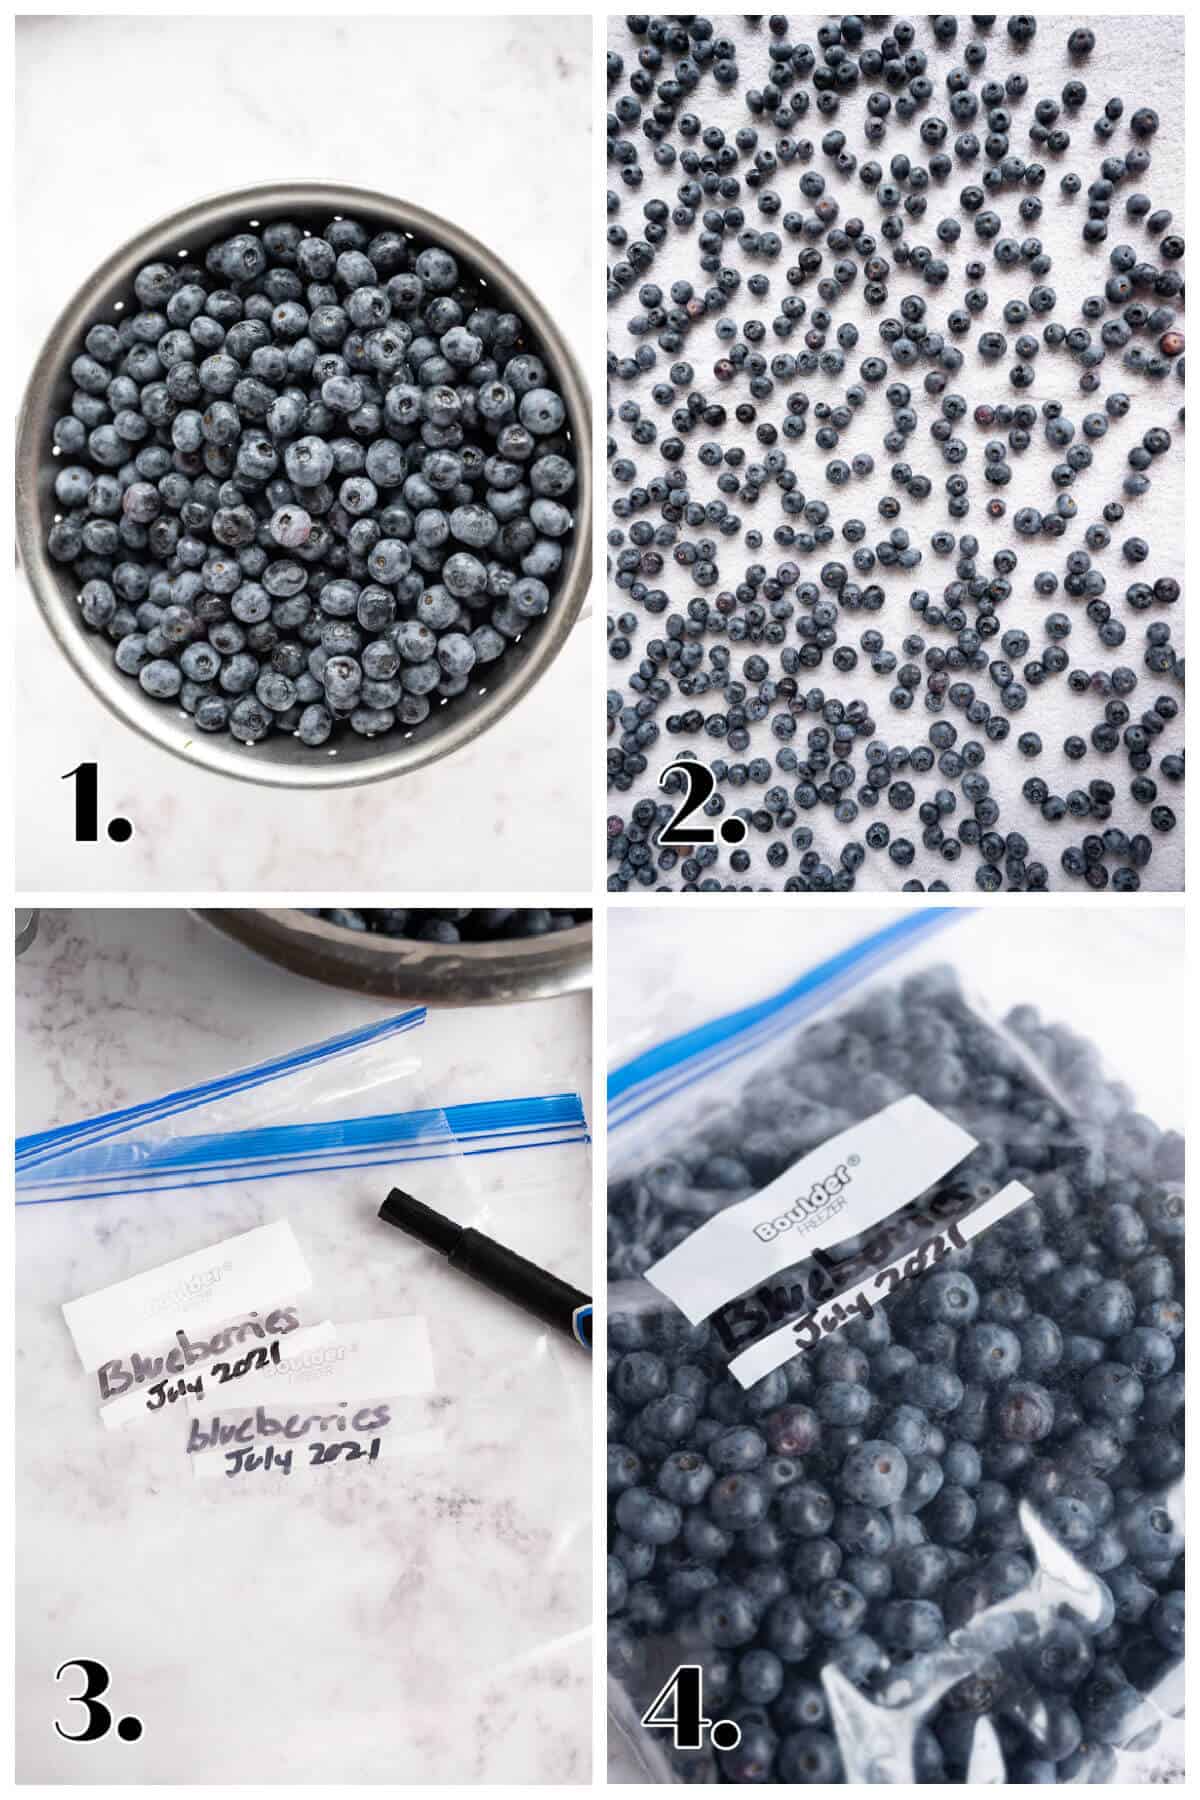 4 image collage showing steps to freezing blueberries: 1-wash blueberries; 2-air dry blueberries on a towel; 3. label freezer bags; 4-put berries in bags and freeze.